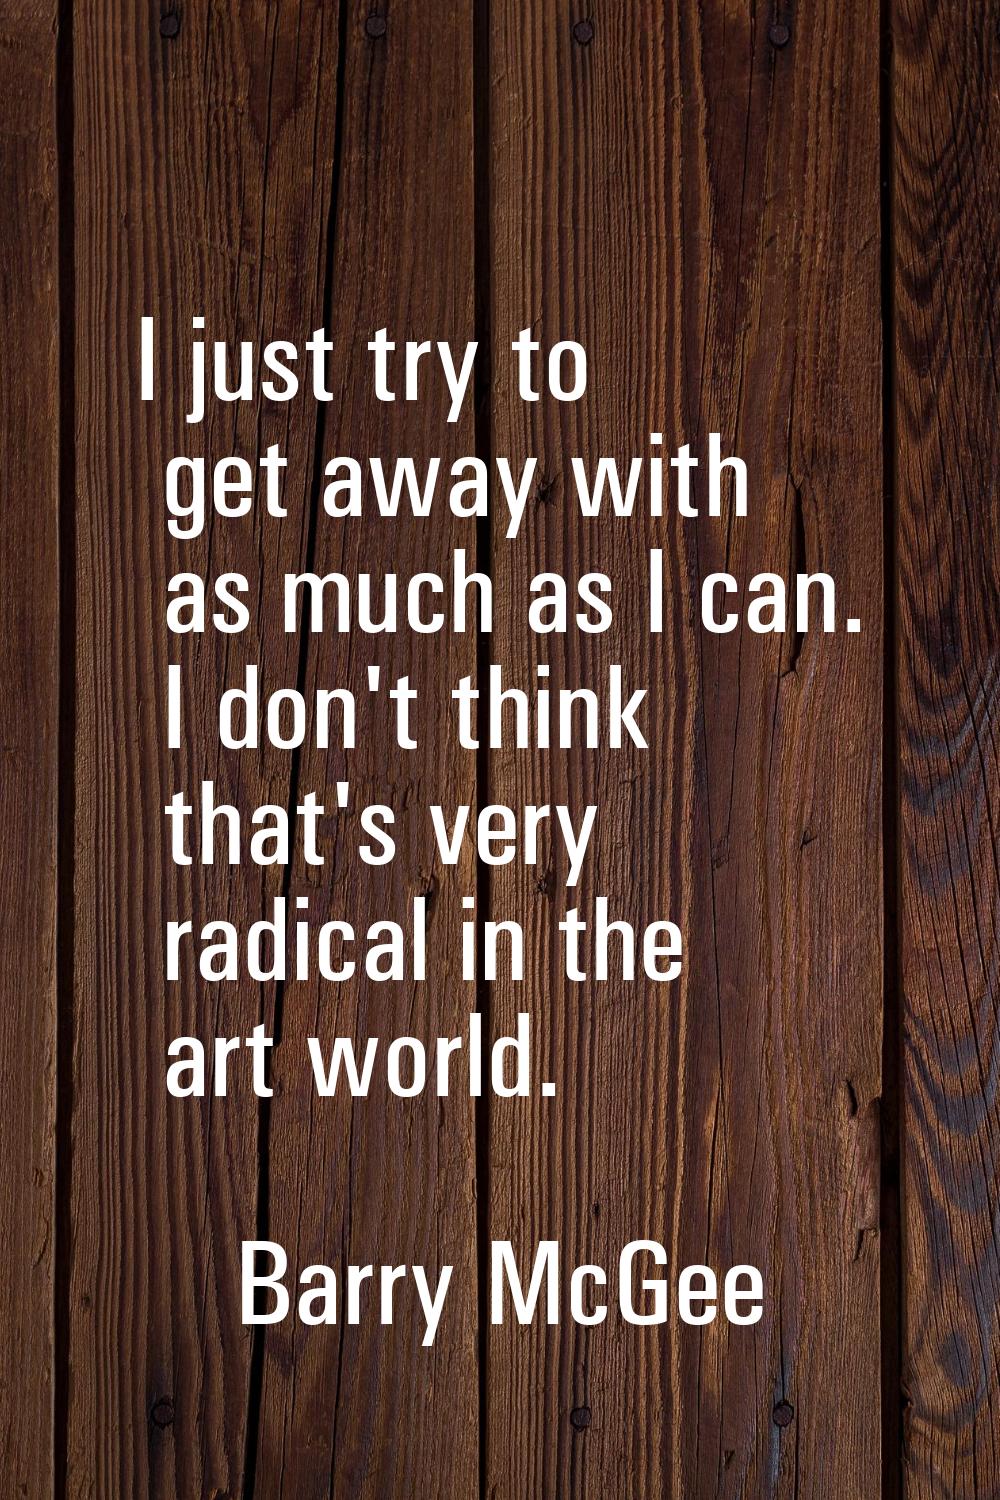 I just try to get away with as much as I can. I don't think that's very radical in the art world.